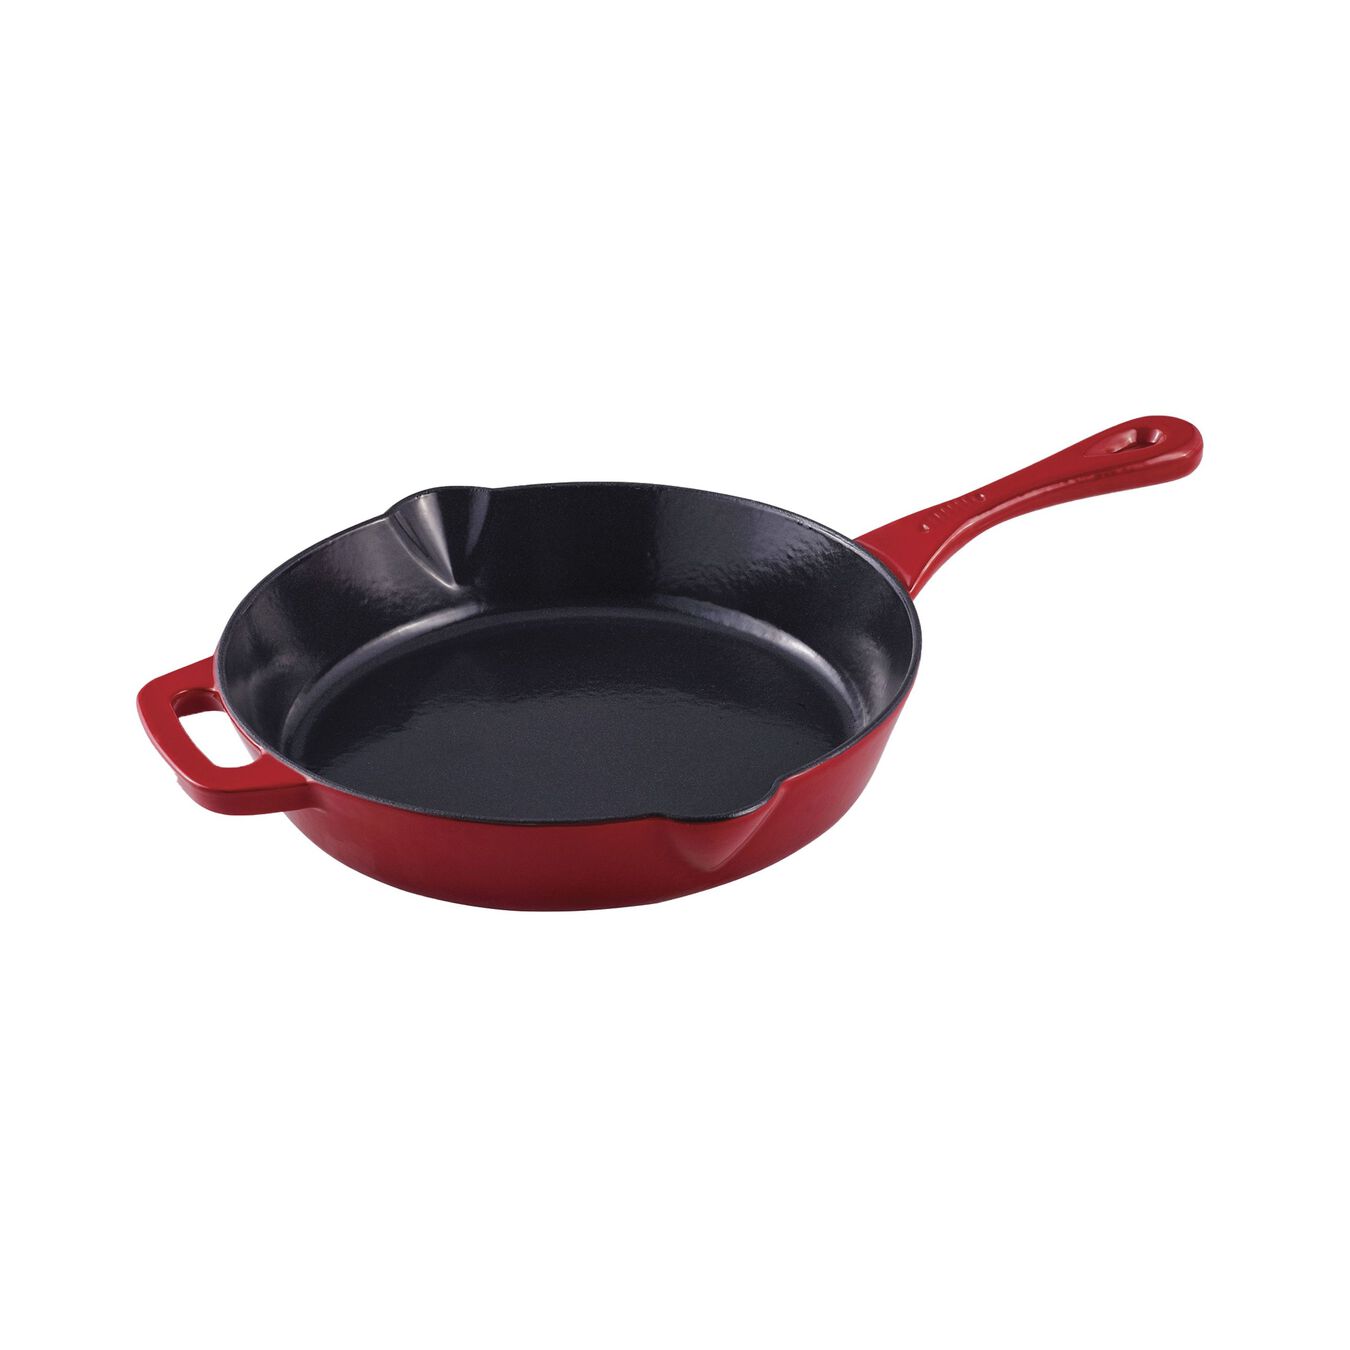 30 cm / 12 inch cast iron Frying pan,,large 1